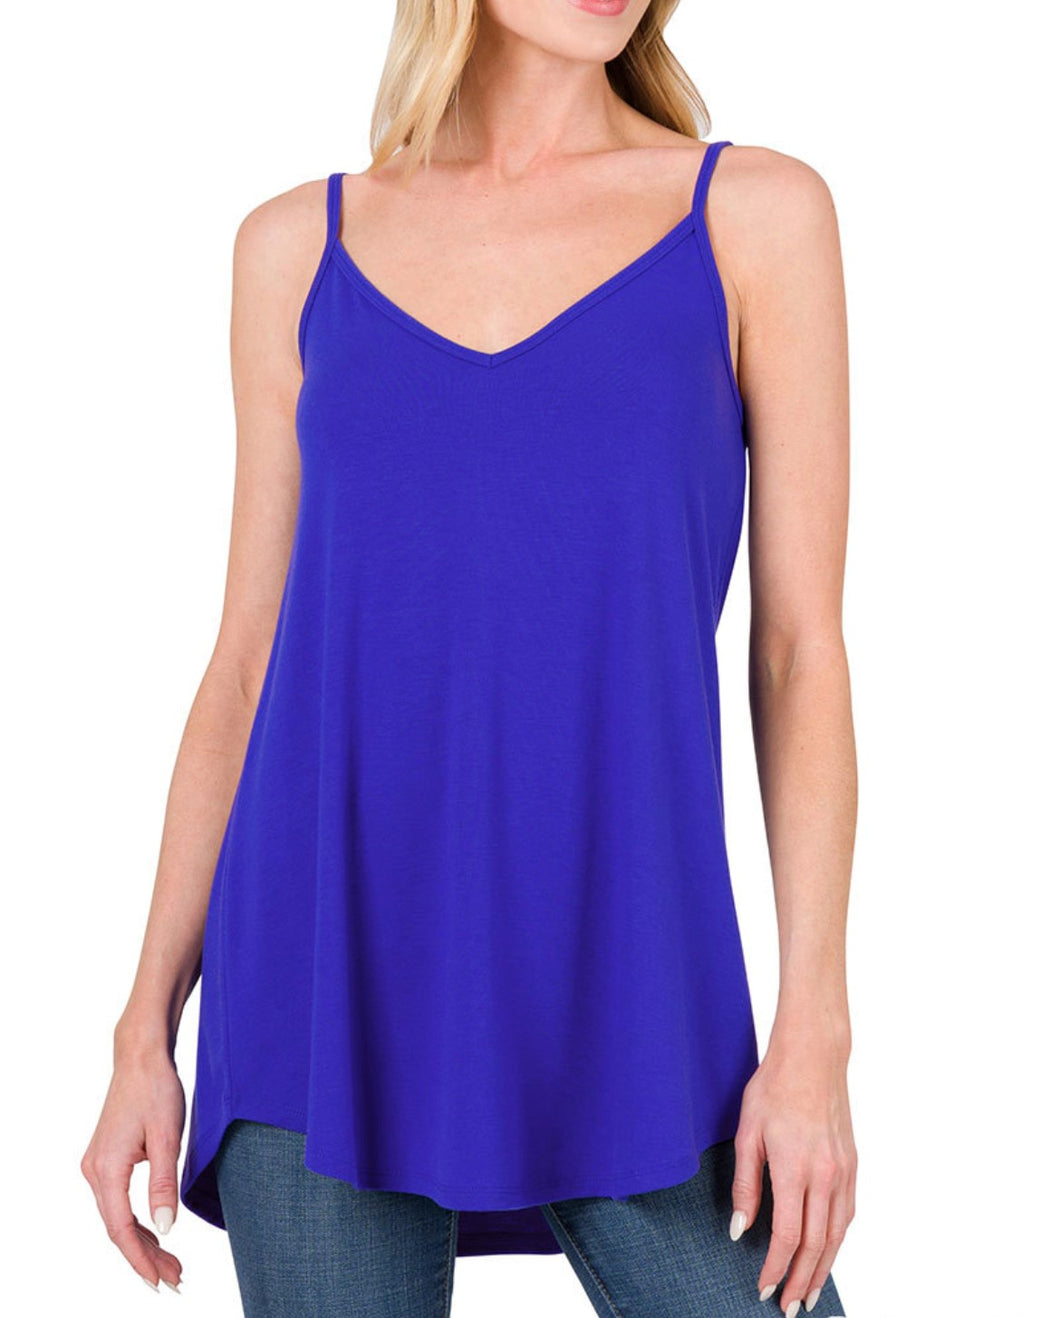 Reversible Tank Top V Neck & Round Bright Blue